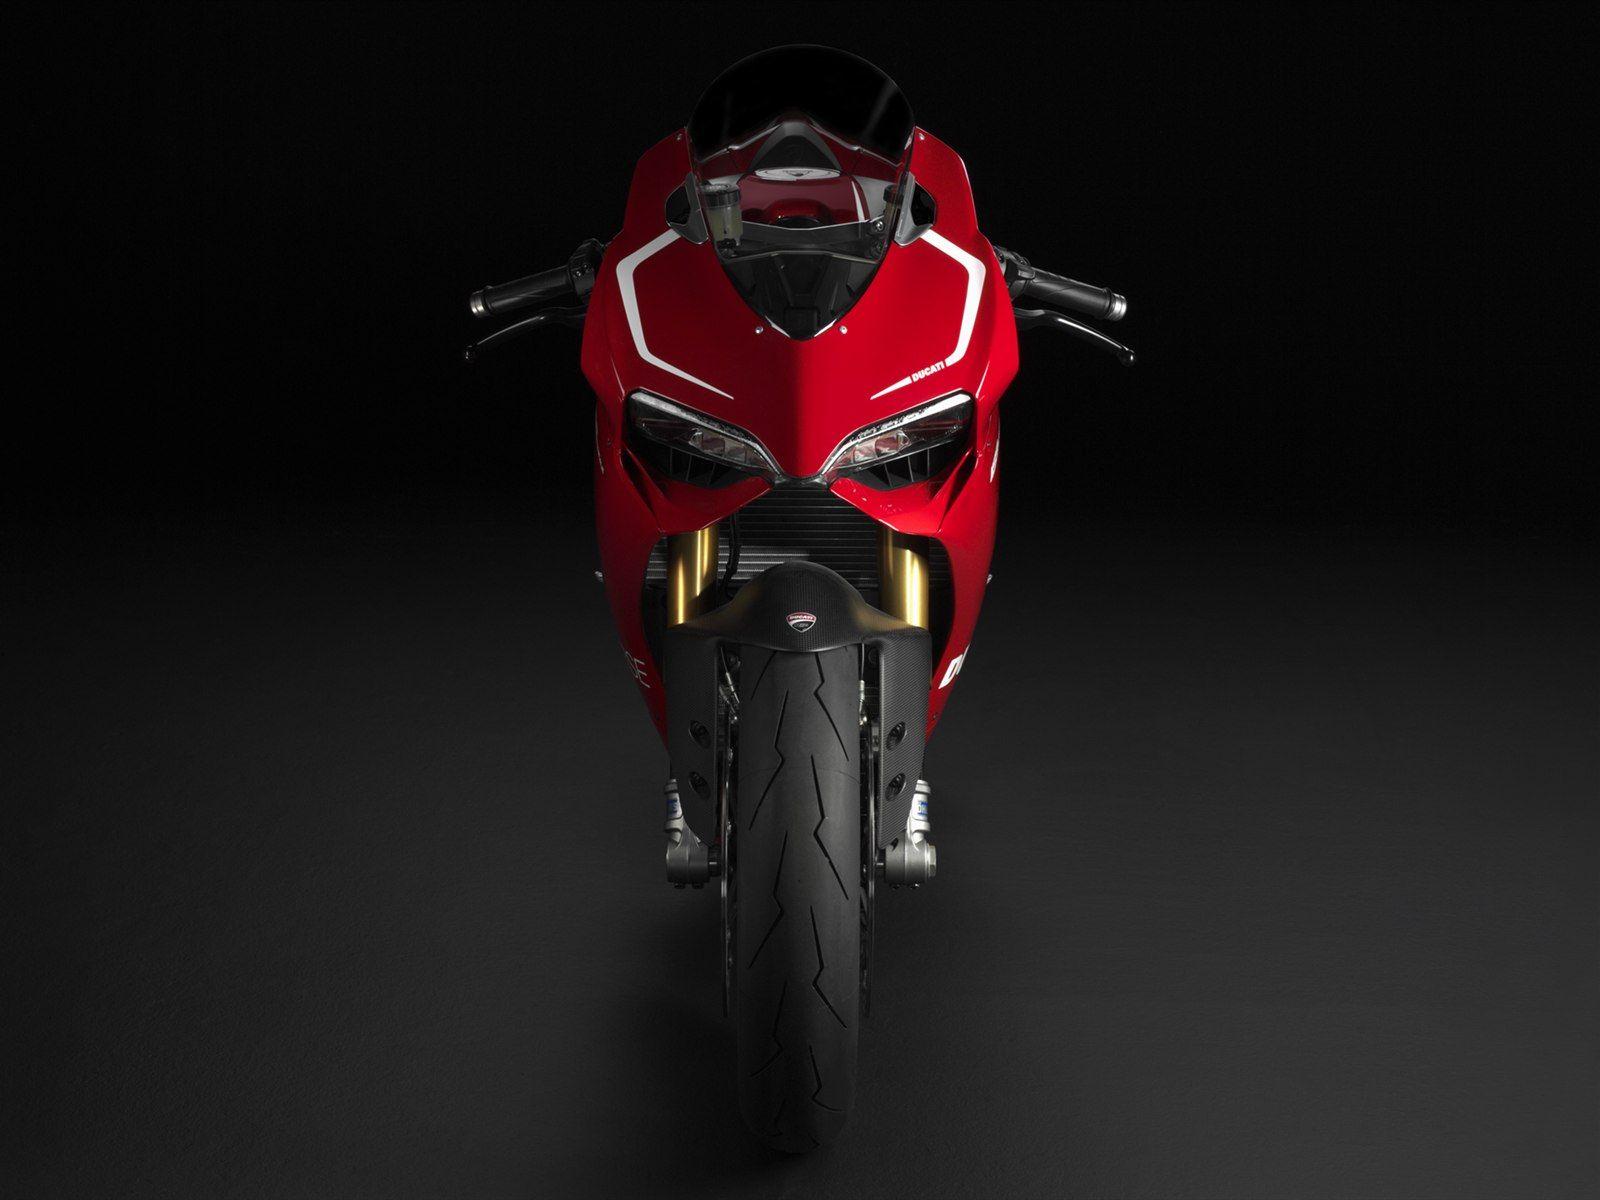 Ducati Superbike 1199 Panigale R 2013 Exotic Car Picture of 136